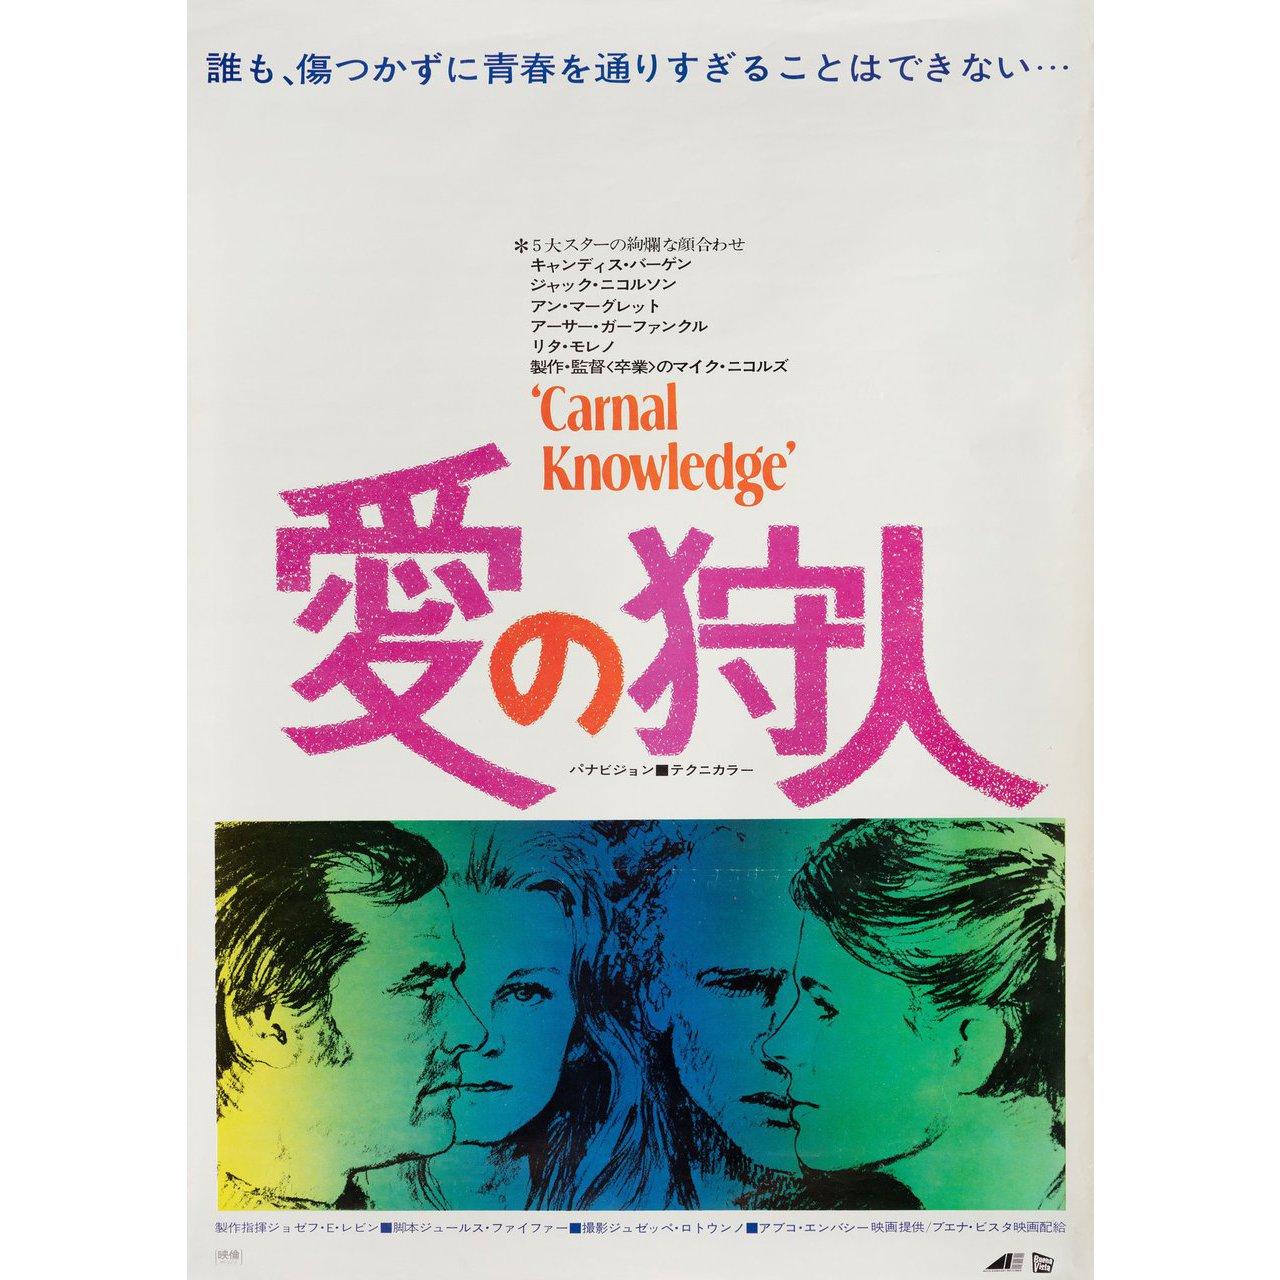 Original 1971 Japanese B2 poster for the film Carnal Knowledge directed by Mike Nichols with Jack Nicholson / Ann-Margret / Art Garfunkel / Candice Bergen. Very Good-Fine condition, rolled. Please note: the size is stated in inches and the actual